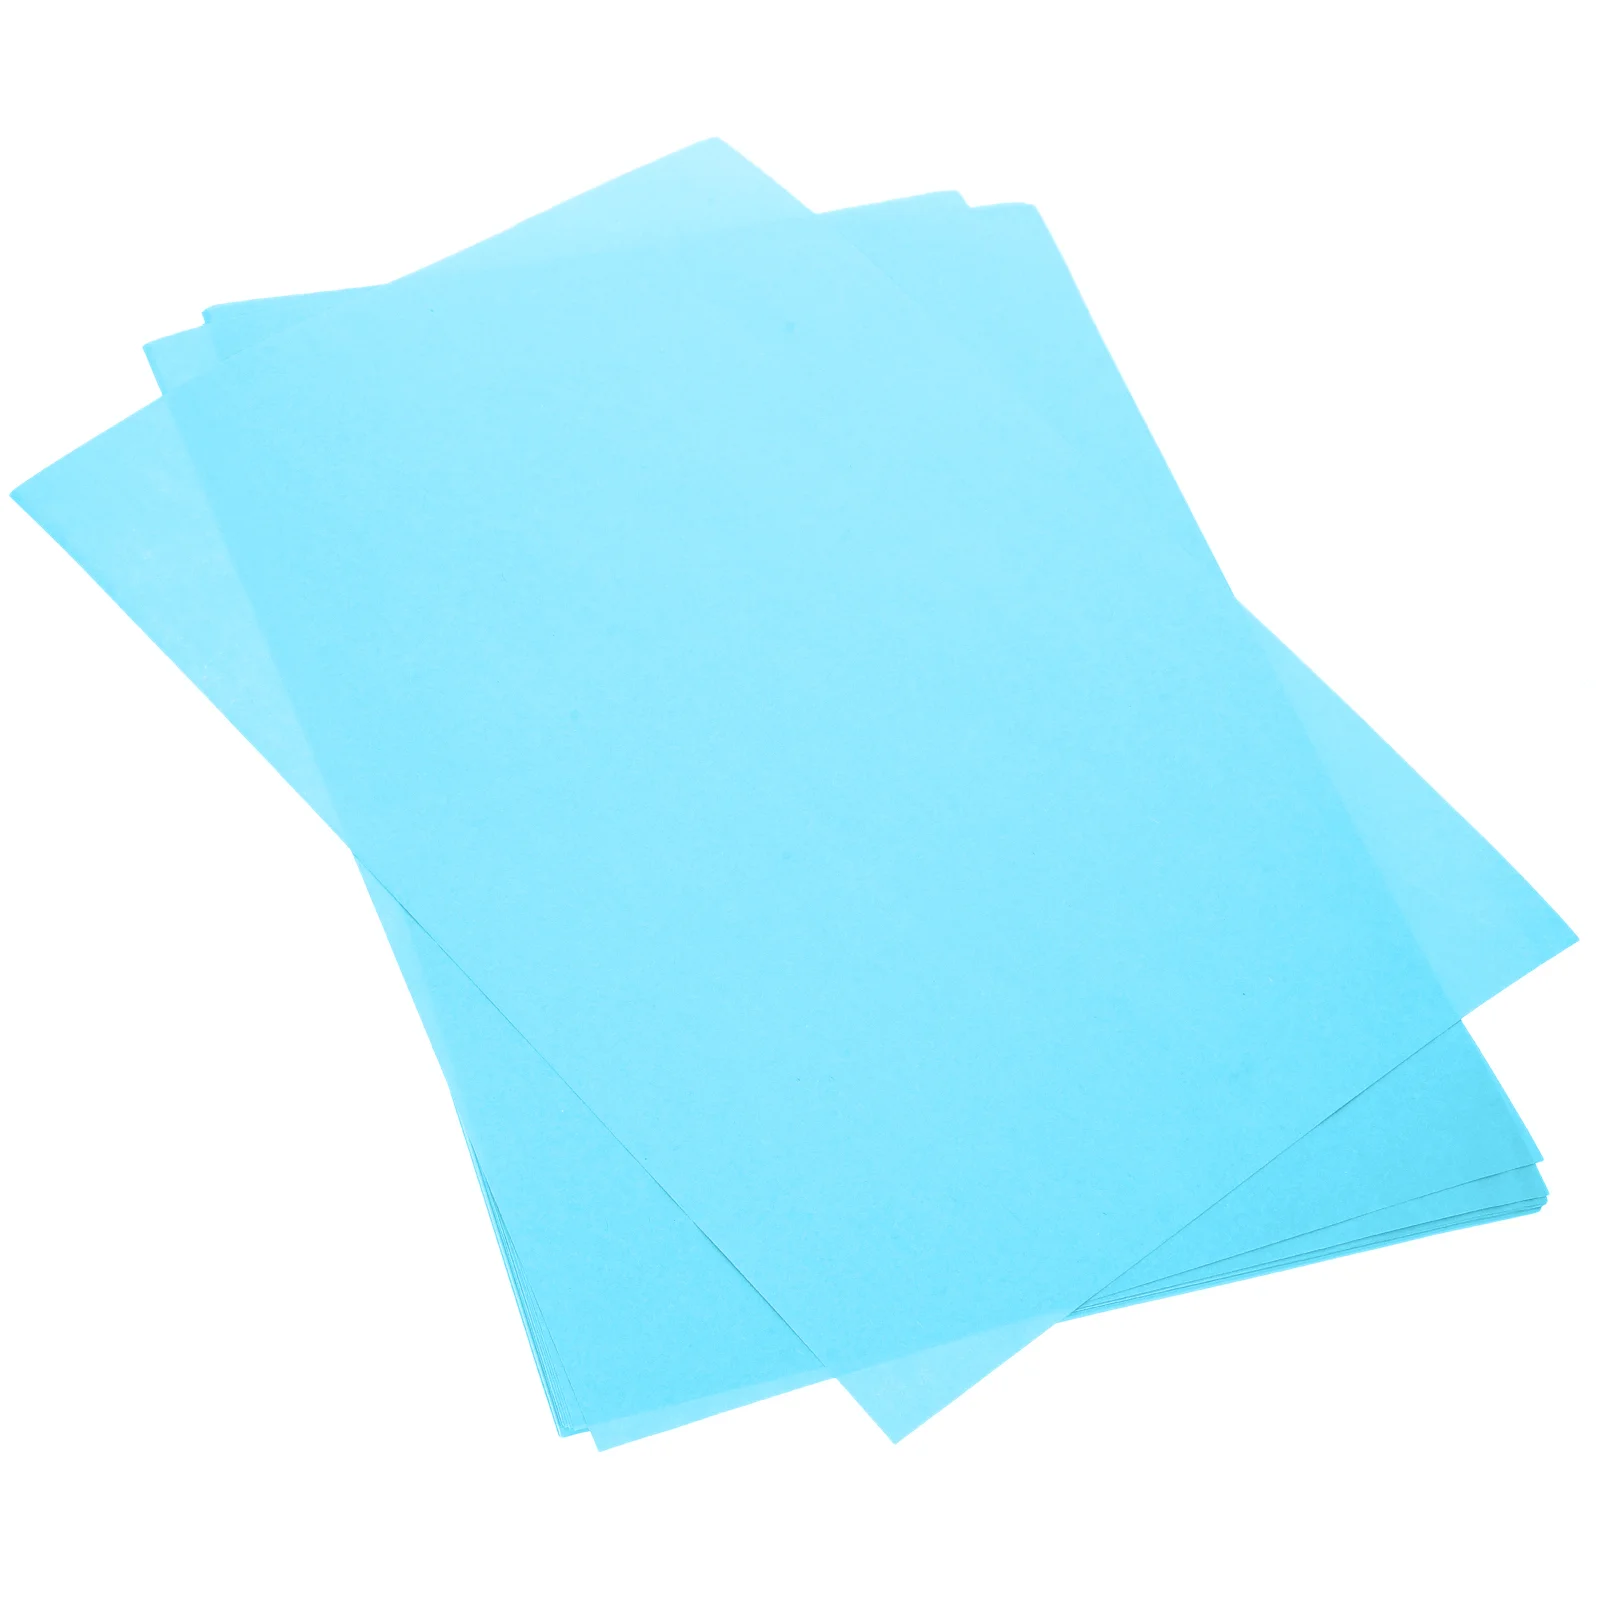 

100 Sheets Printer Drawing Paper Writing Thick Printing DIY Blank Origami for A4 Child Painting Cardboard